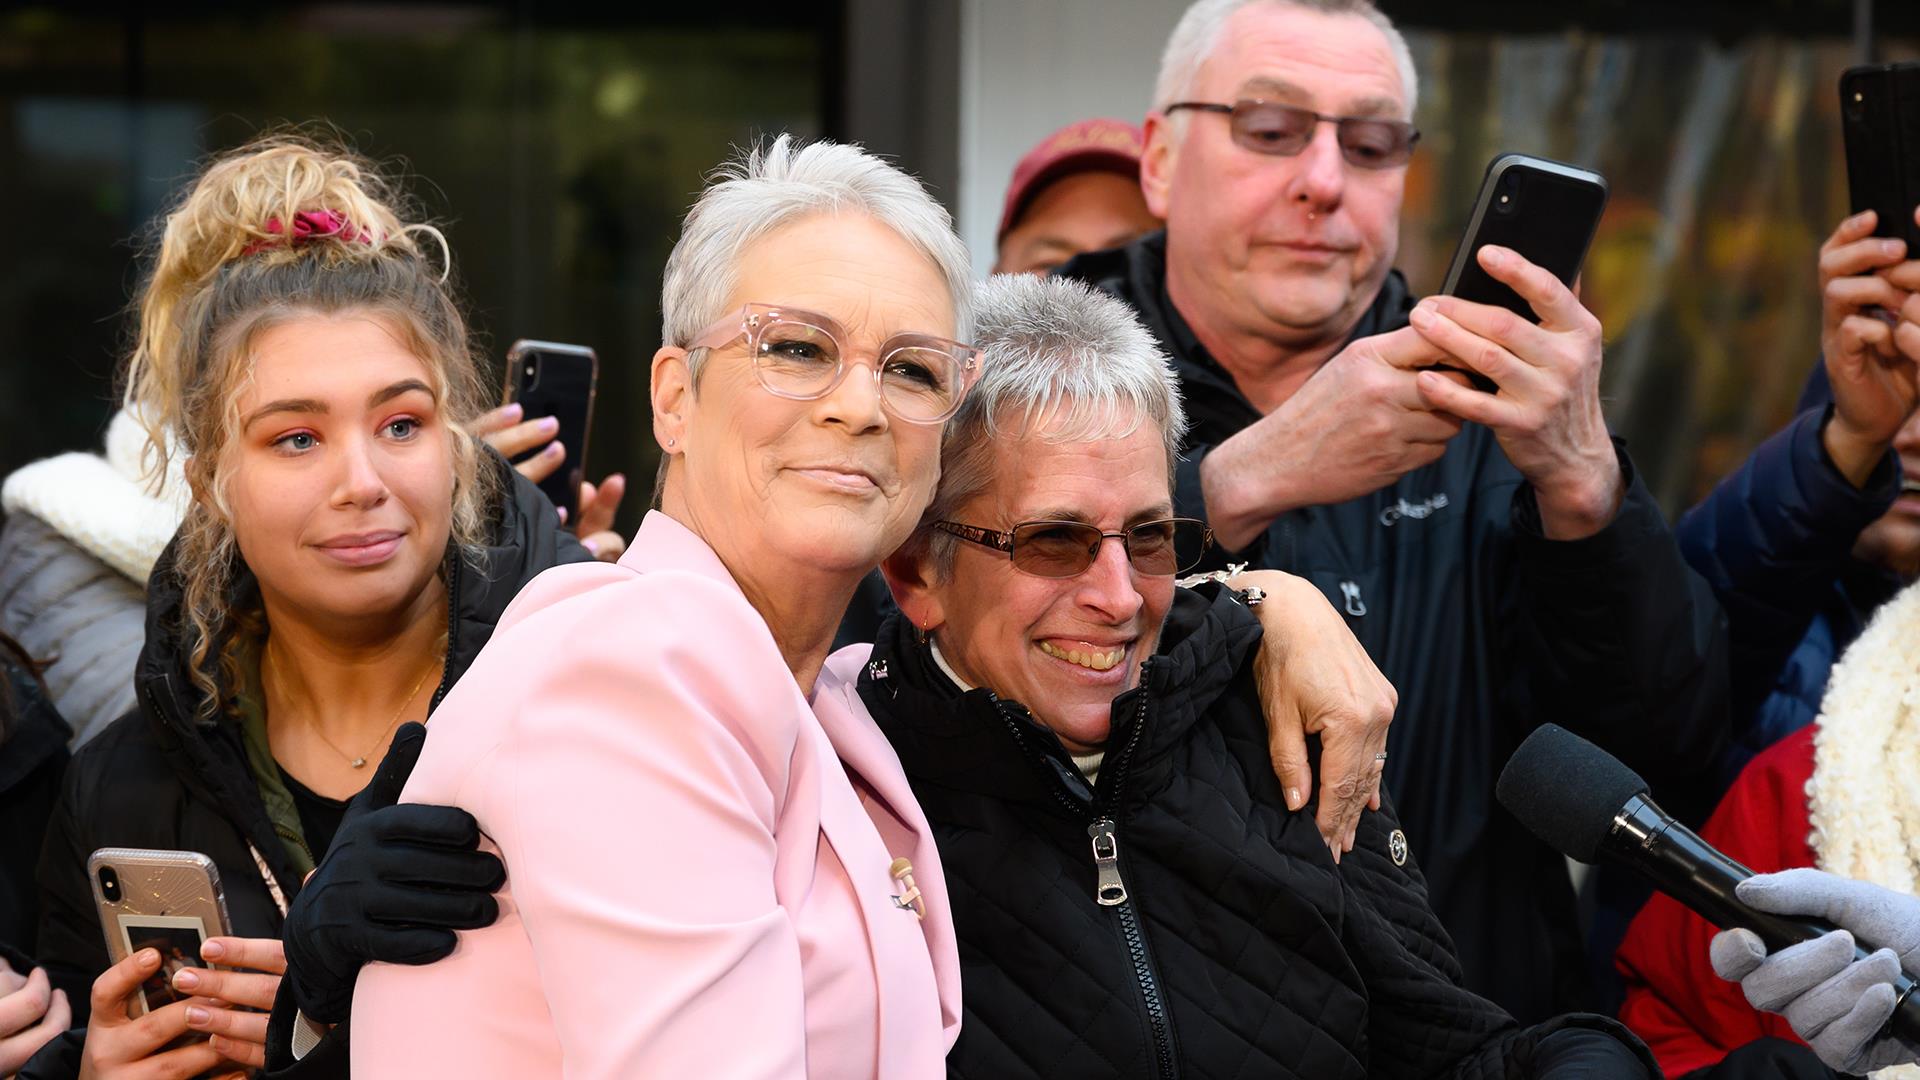 See Jamie Lee Curtis meet her look-alike fan on the TODAY plaza